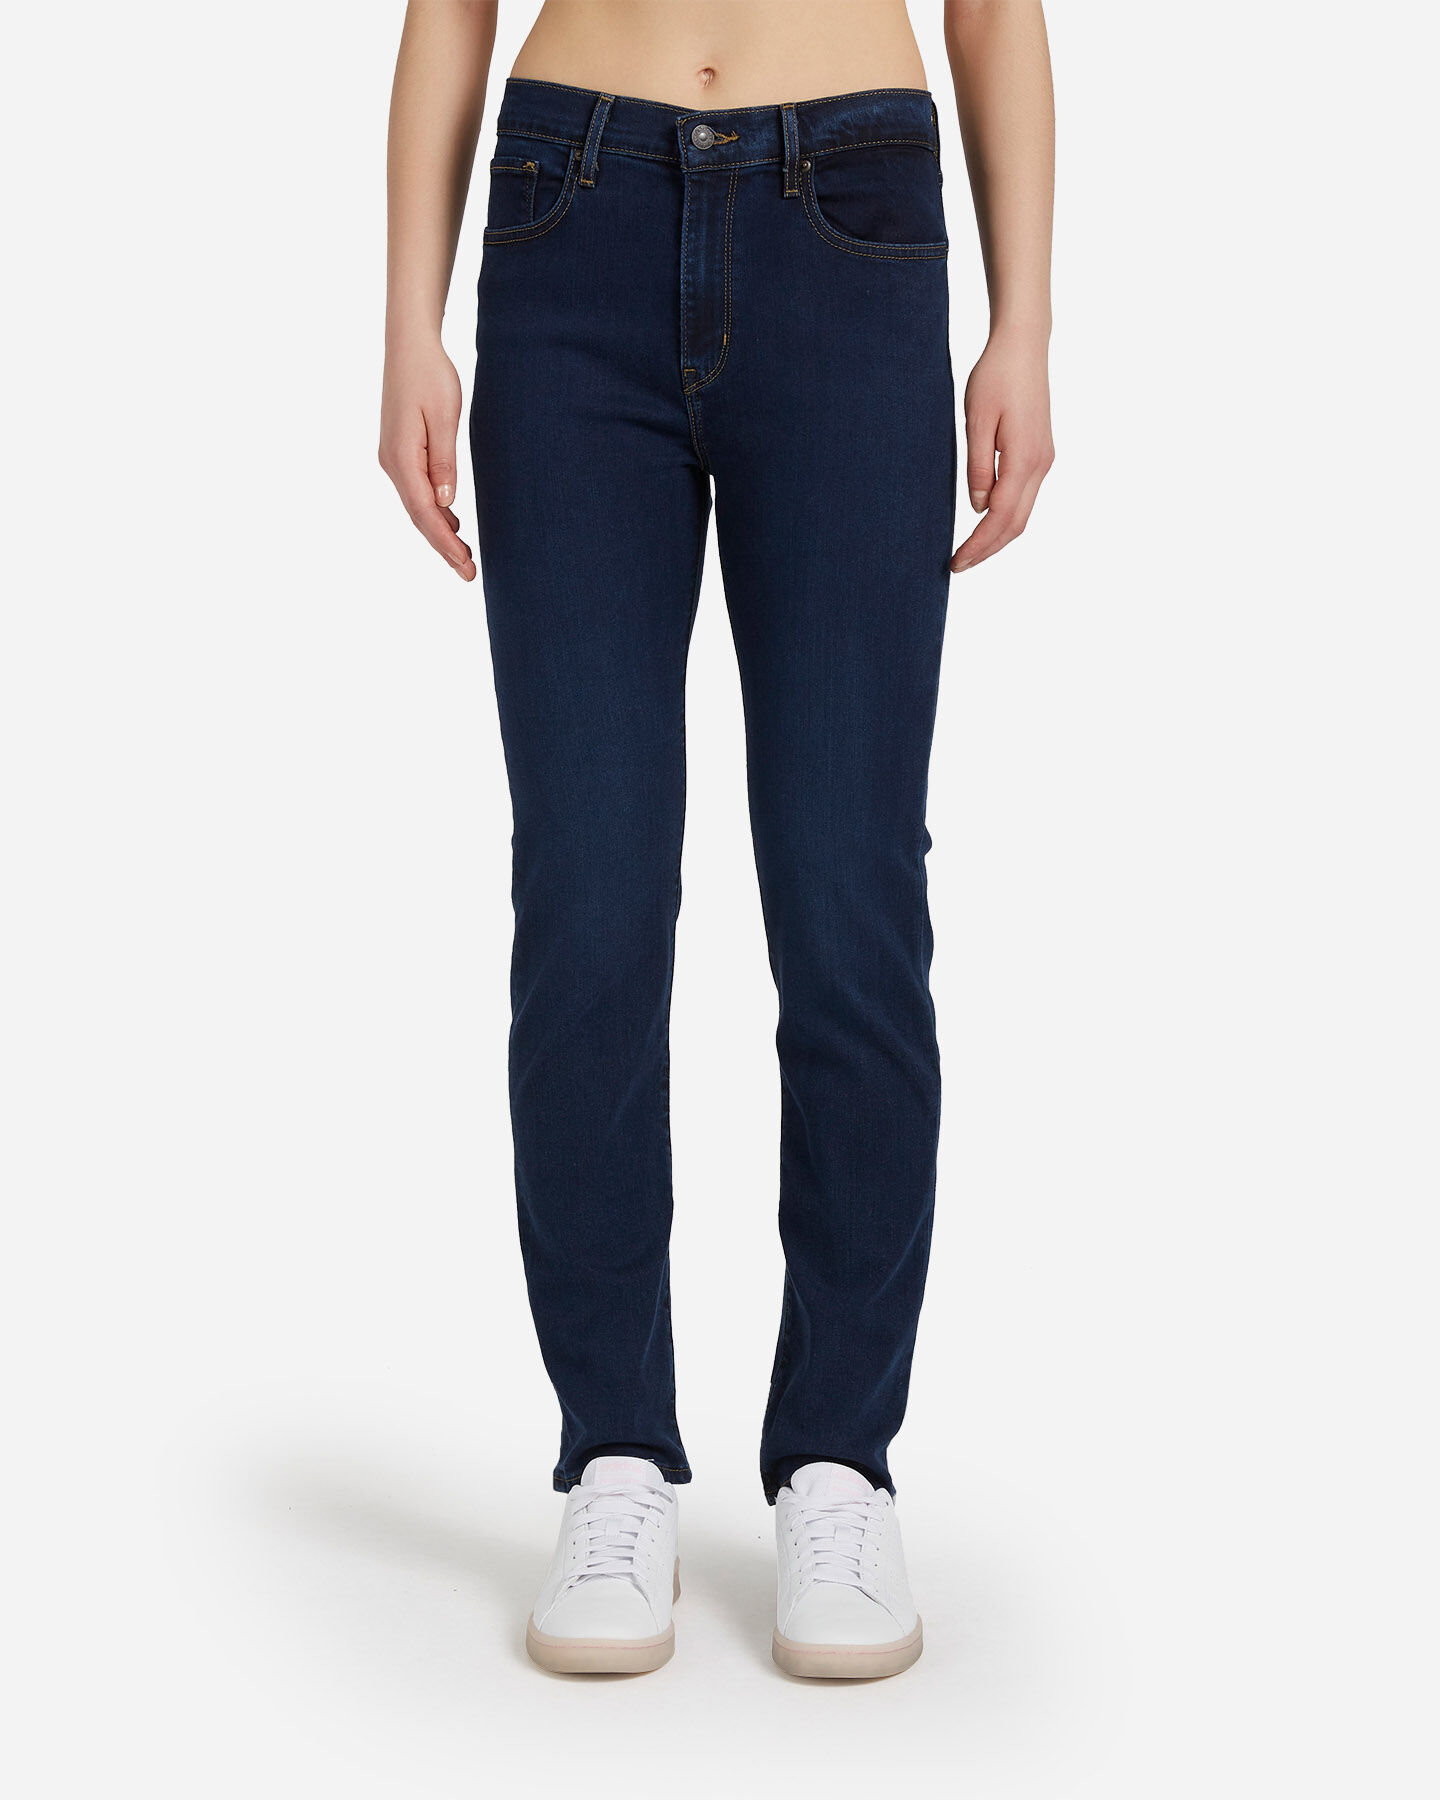  Jeans LEVI'S 724 HIGH RISE REGULAR L30 W S4088778|0105|27 scatto 0